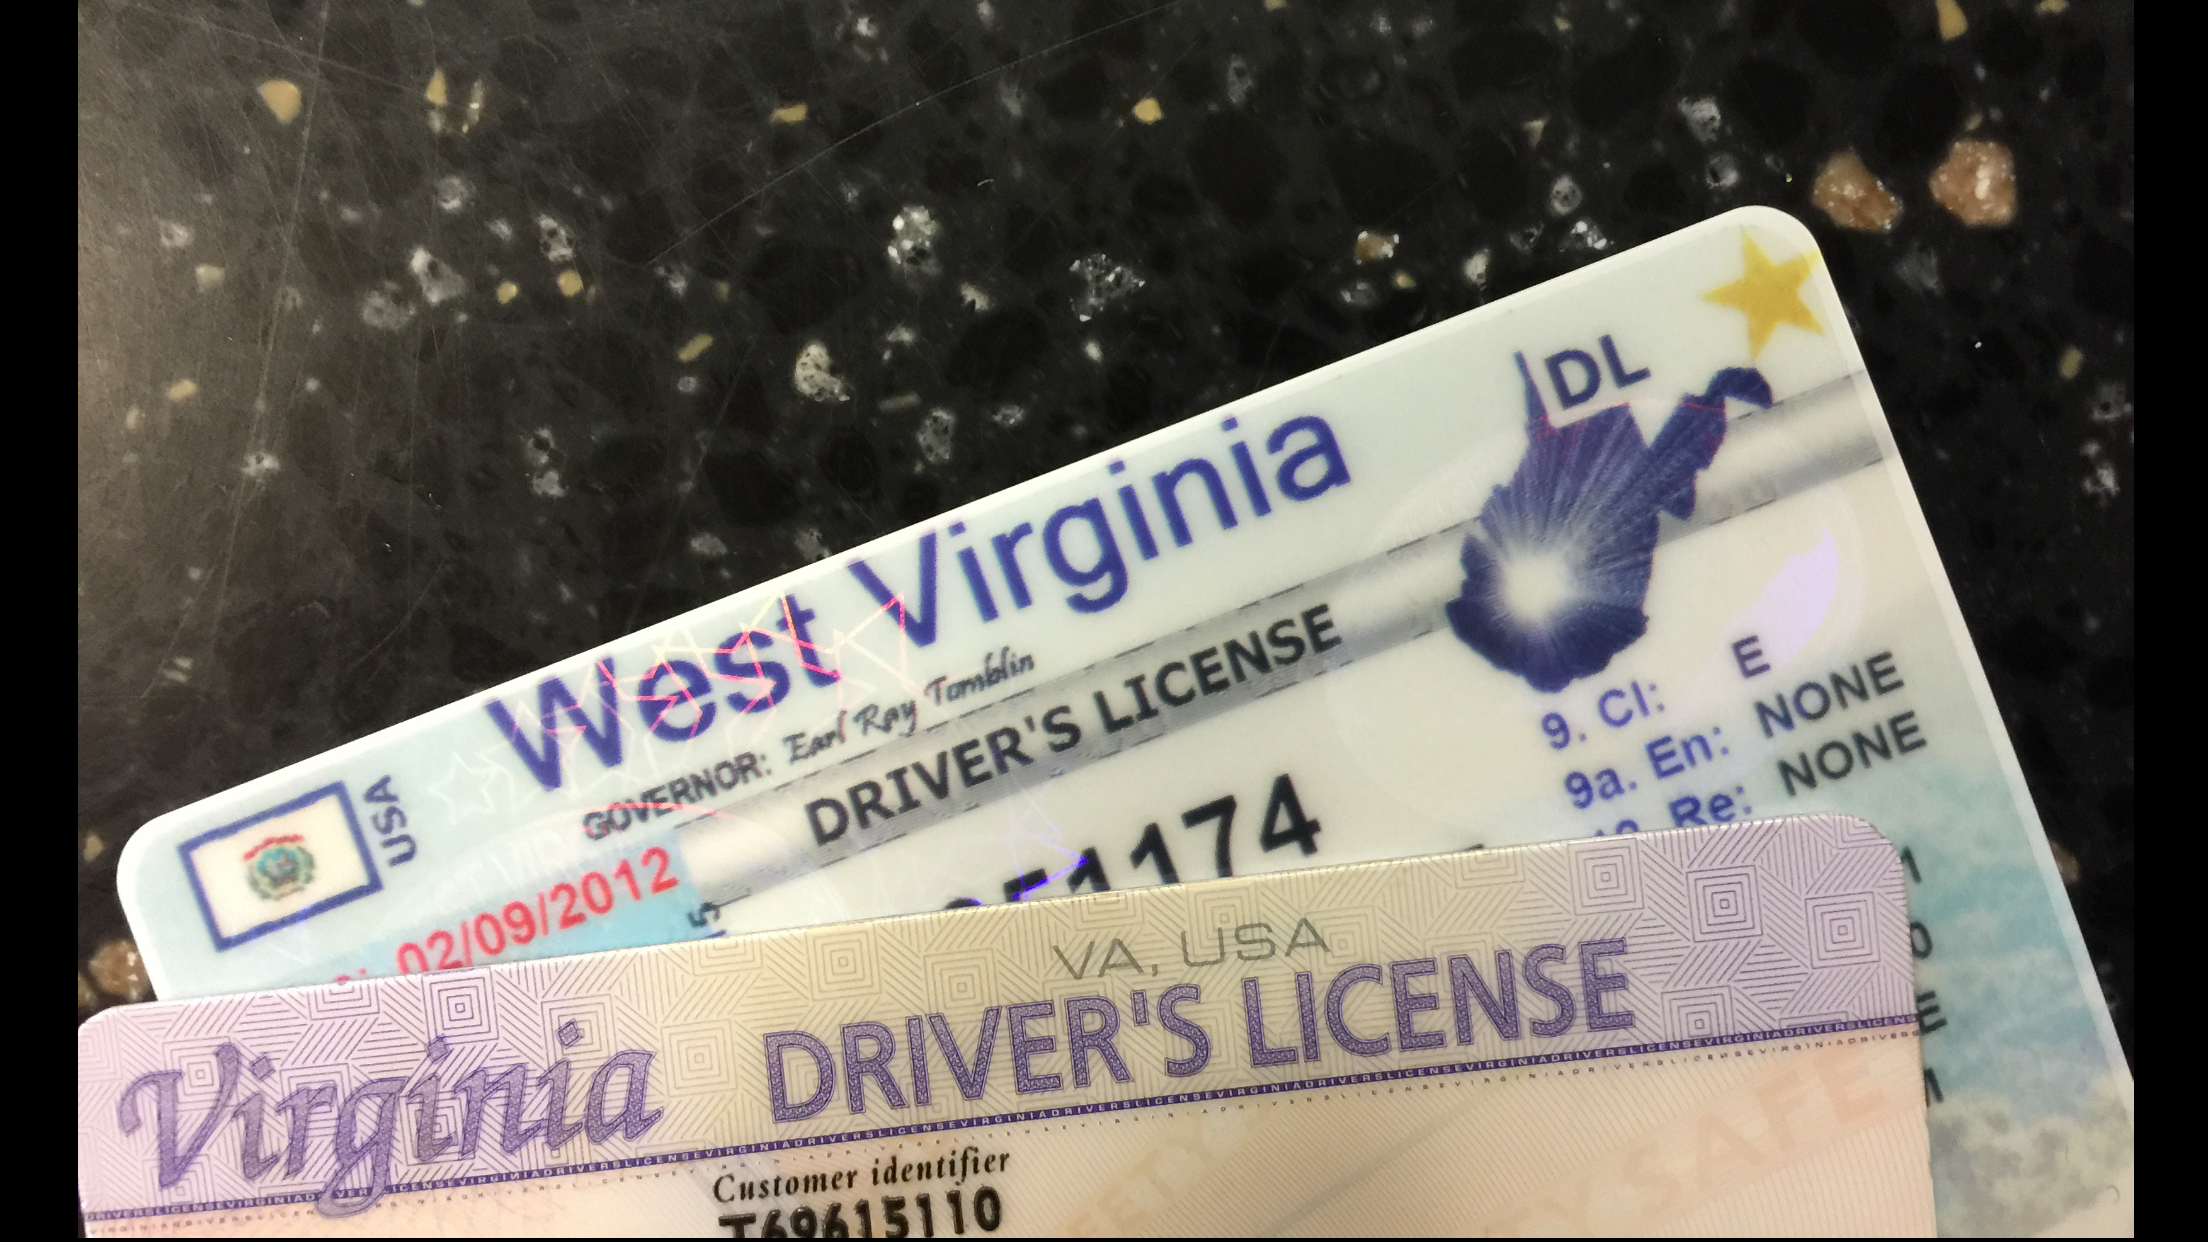 Virginia licenses fail to comply with security rules